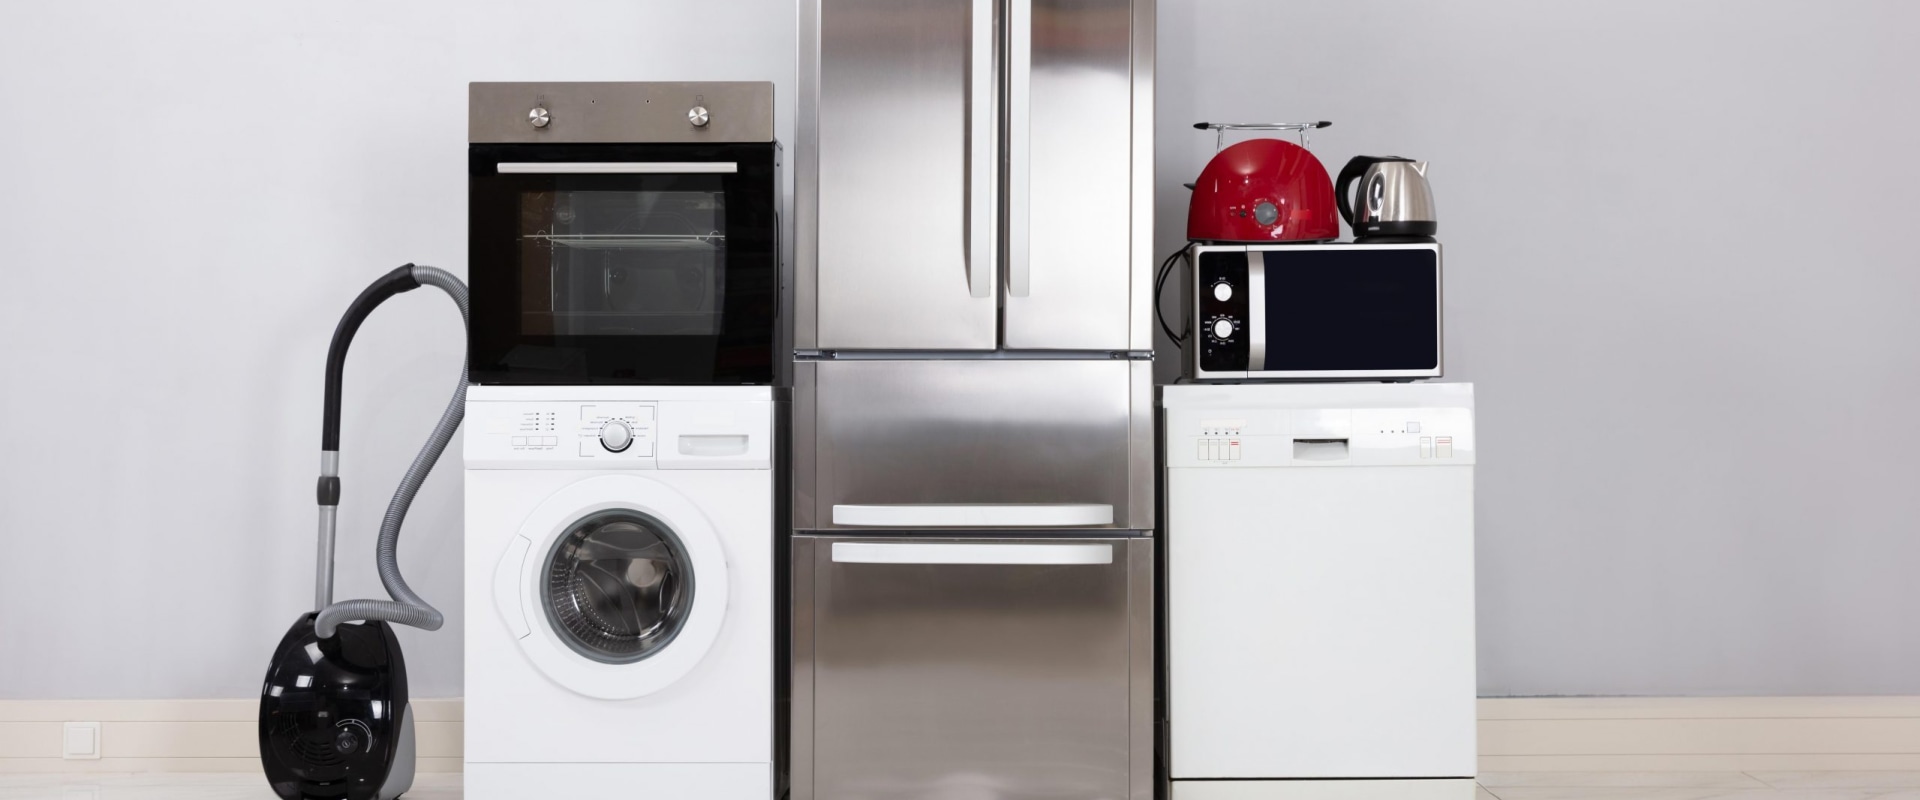 What is the most common appliances used at home?